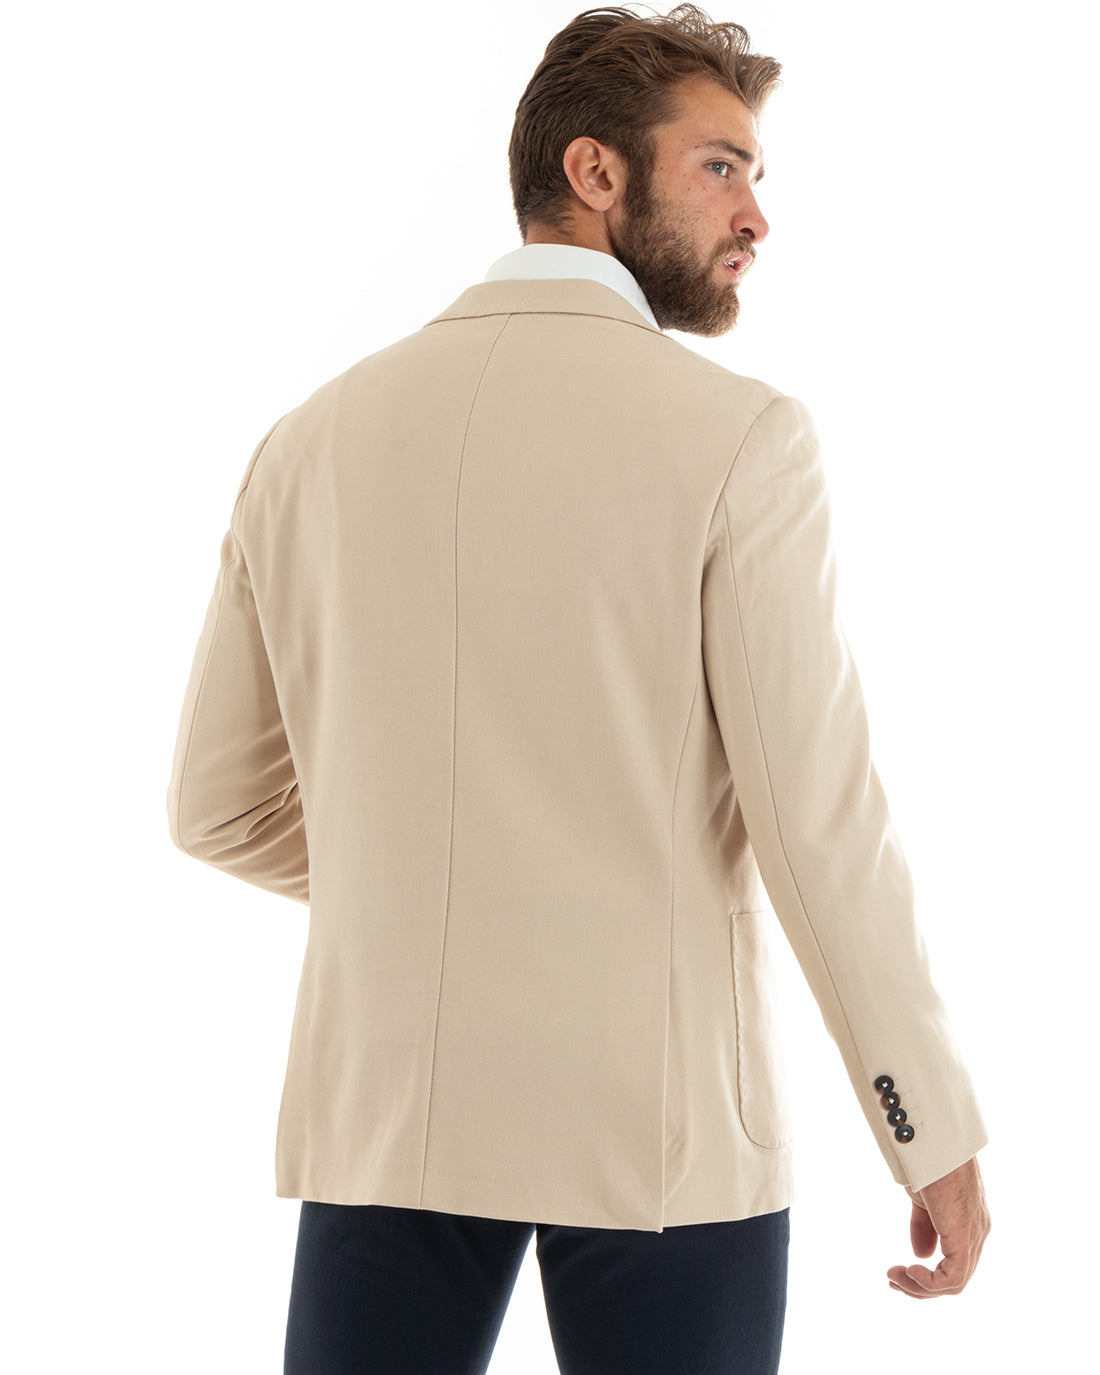 Men's Jacket Basic Blazer Single-breasted Classic Lapel Stitched Solid Color Beige Casual GIOSAL-G3086A